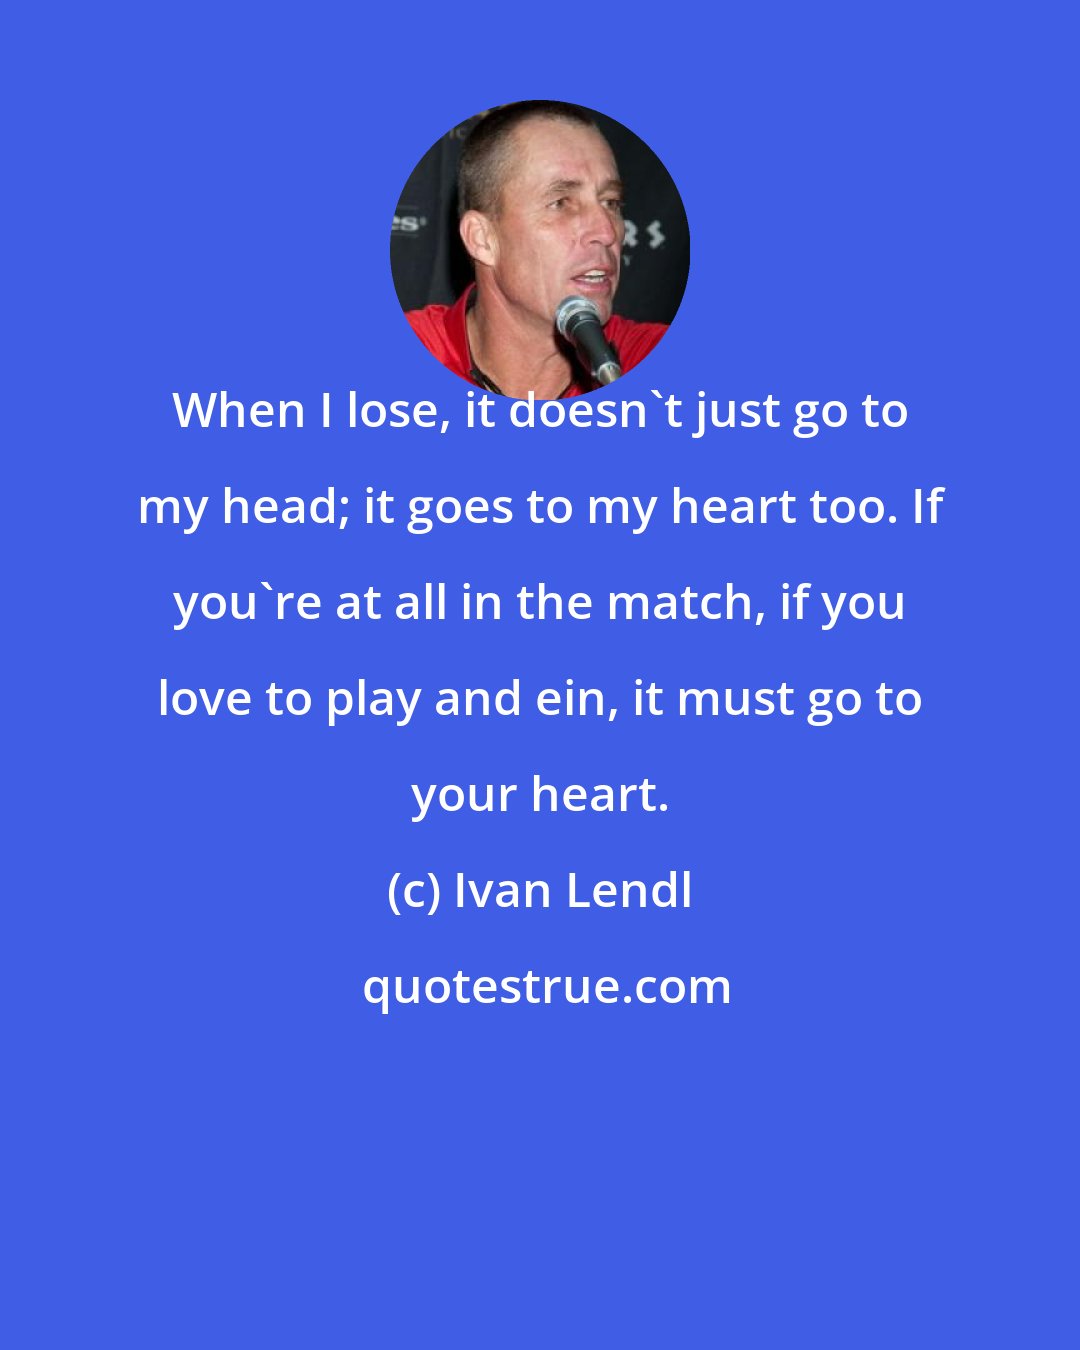 Ivan Lendl: When I lose, it doesn't just go to my head; it goes to my heart too. If you're at all in the match, if you love to play and ein, it must go to your heart.